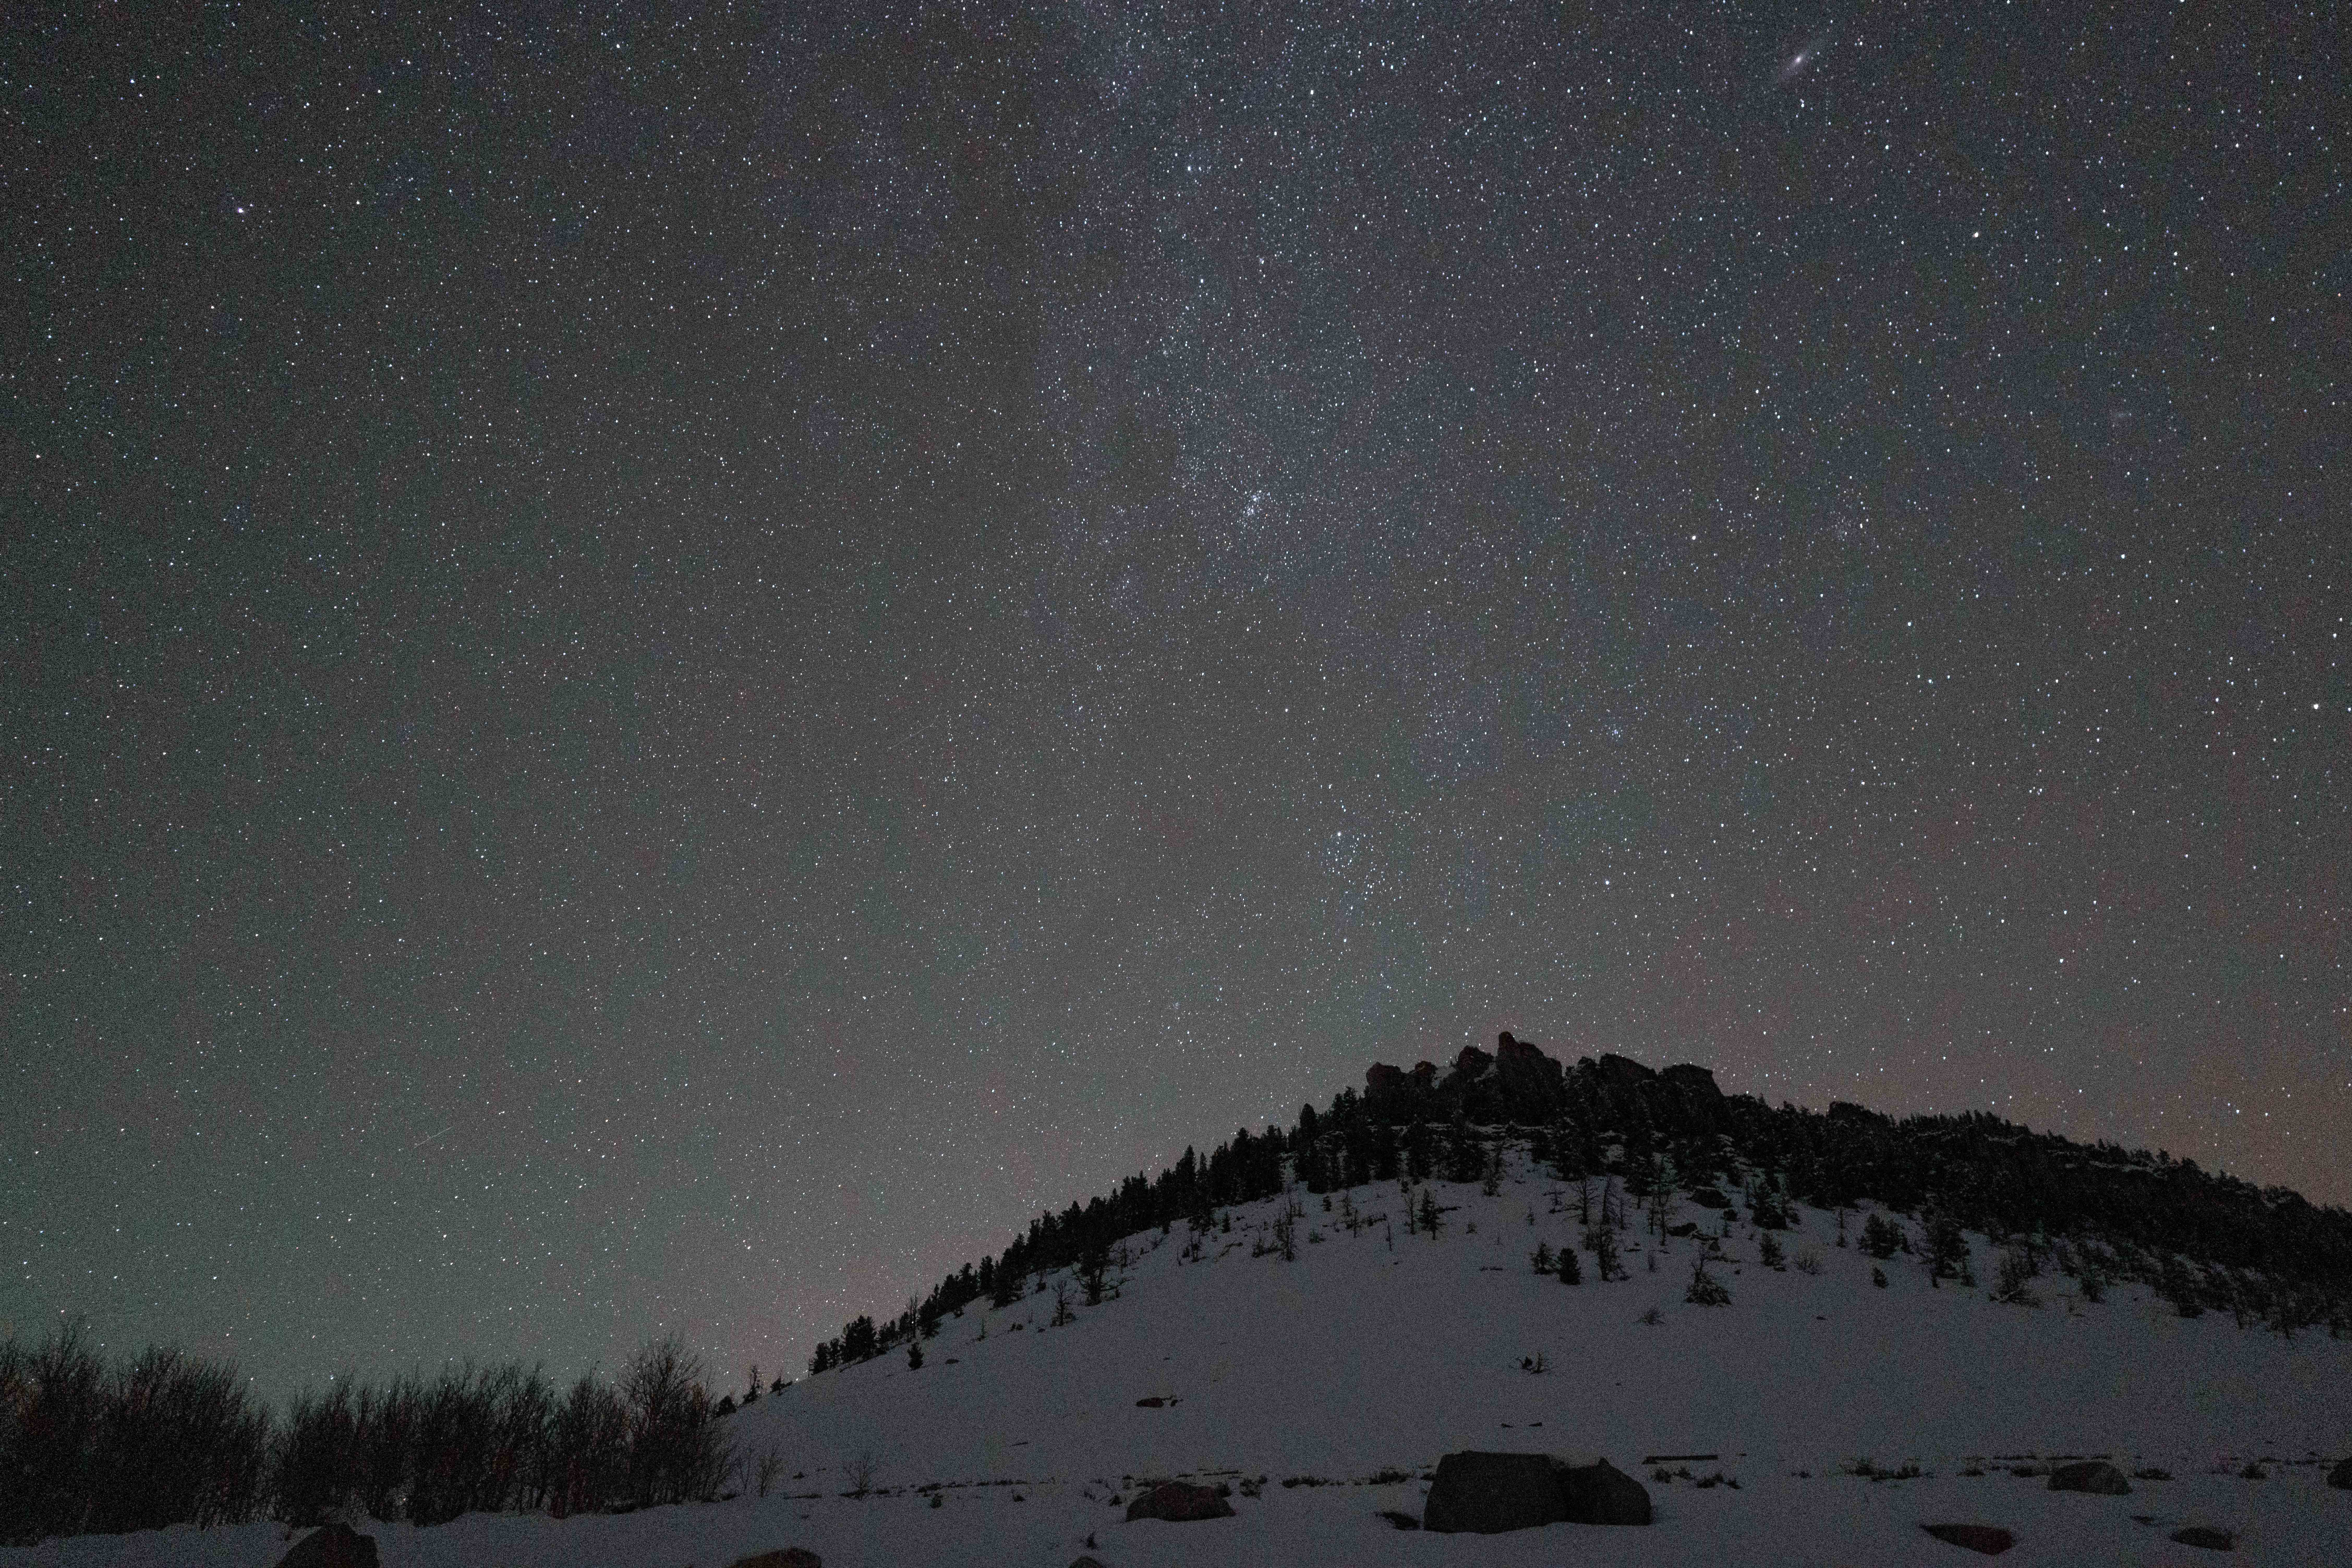 Starry sky over a snowy bluff.